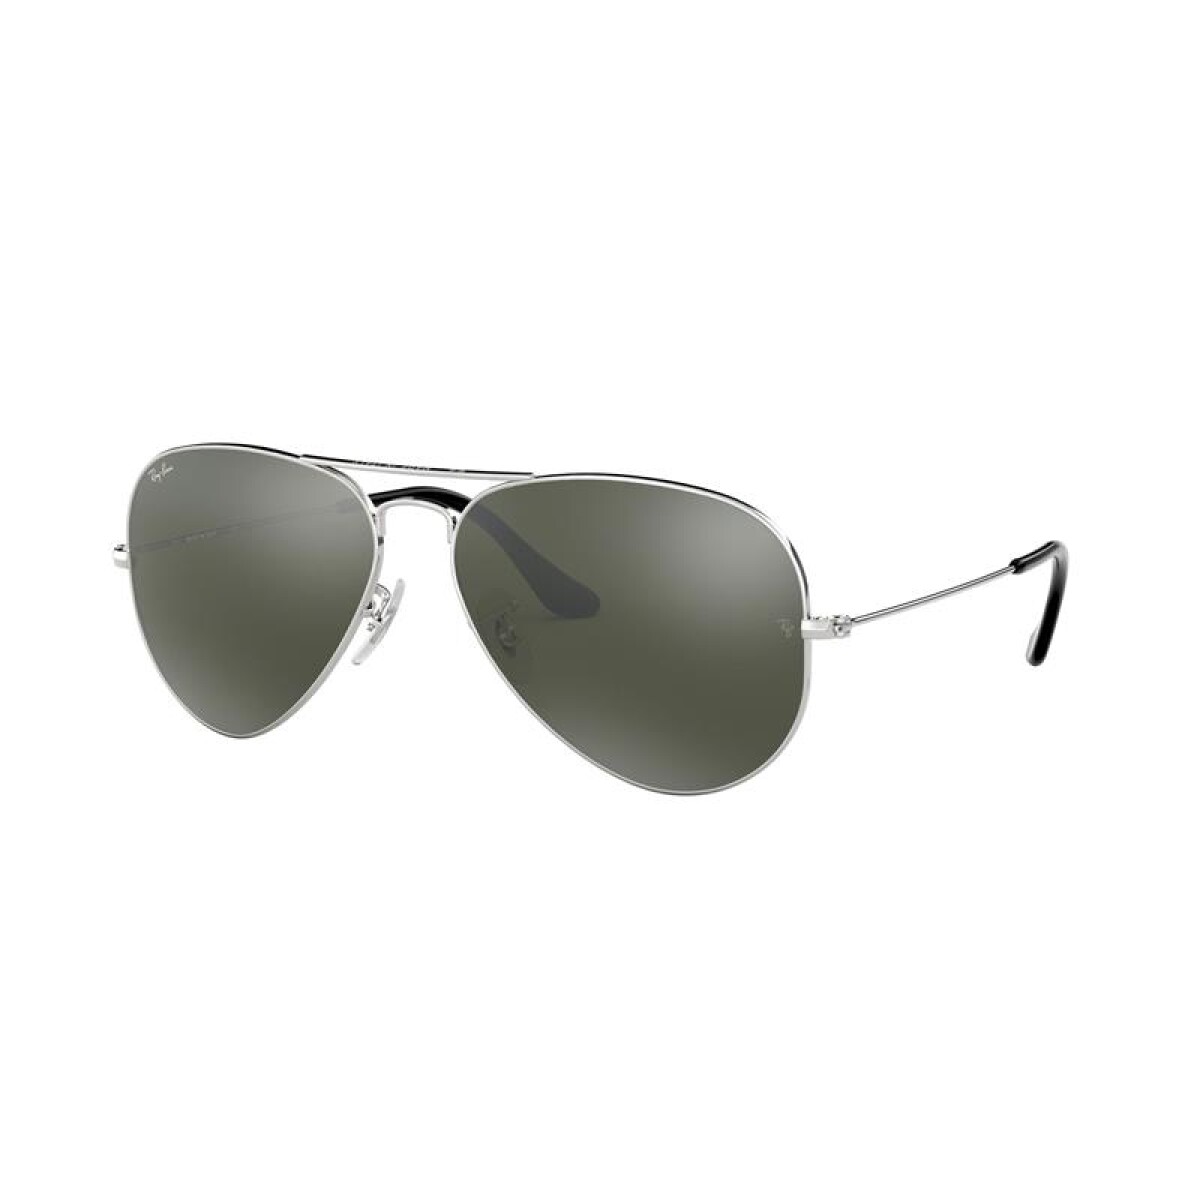 Ray Ban Rb3025 - W3277 